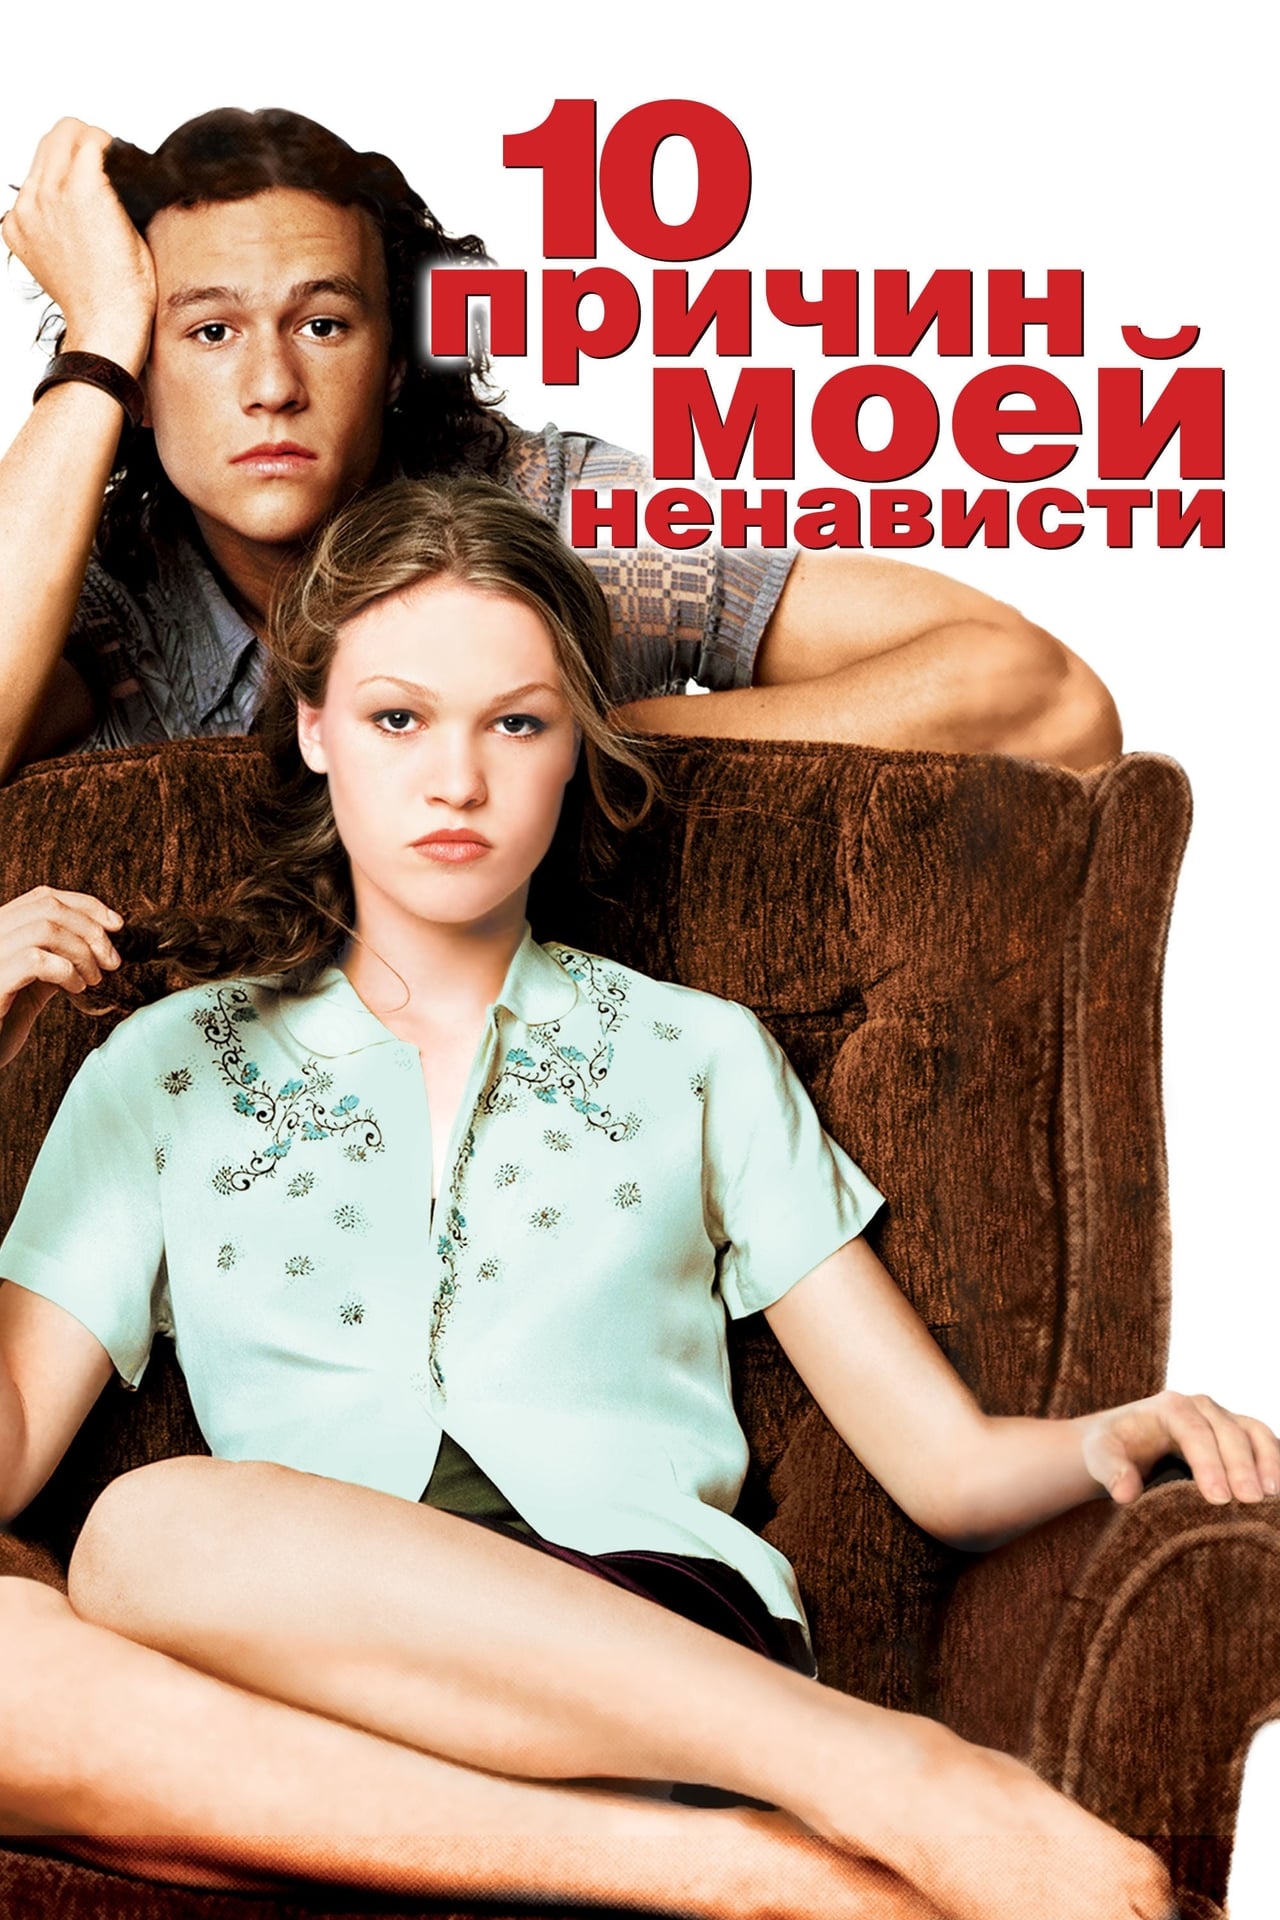 download 10 things i hate about you movie